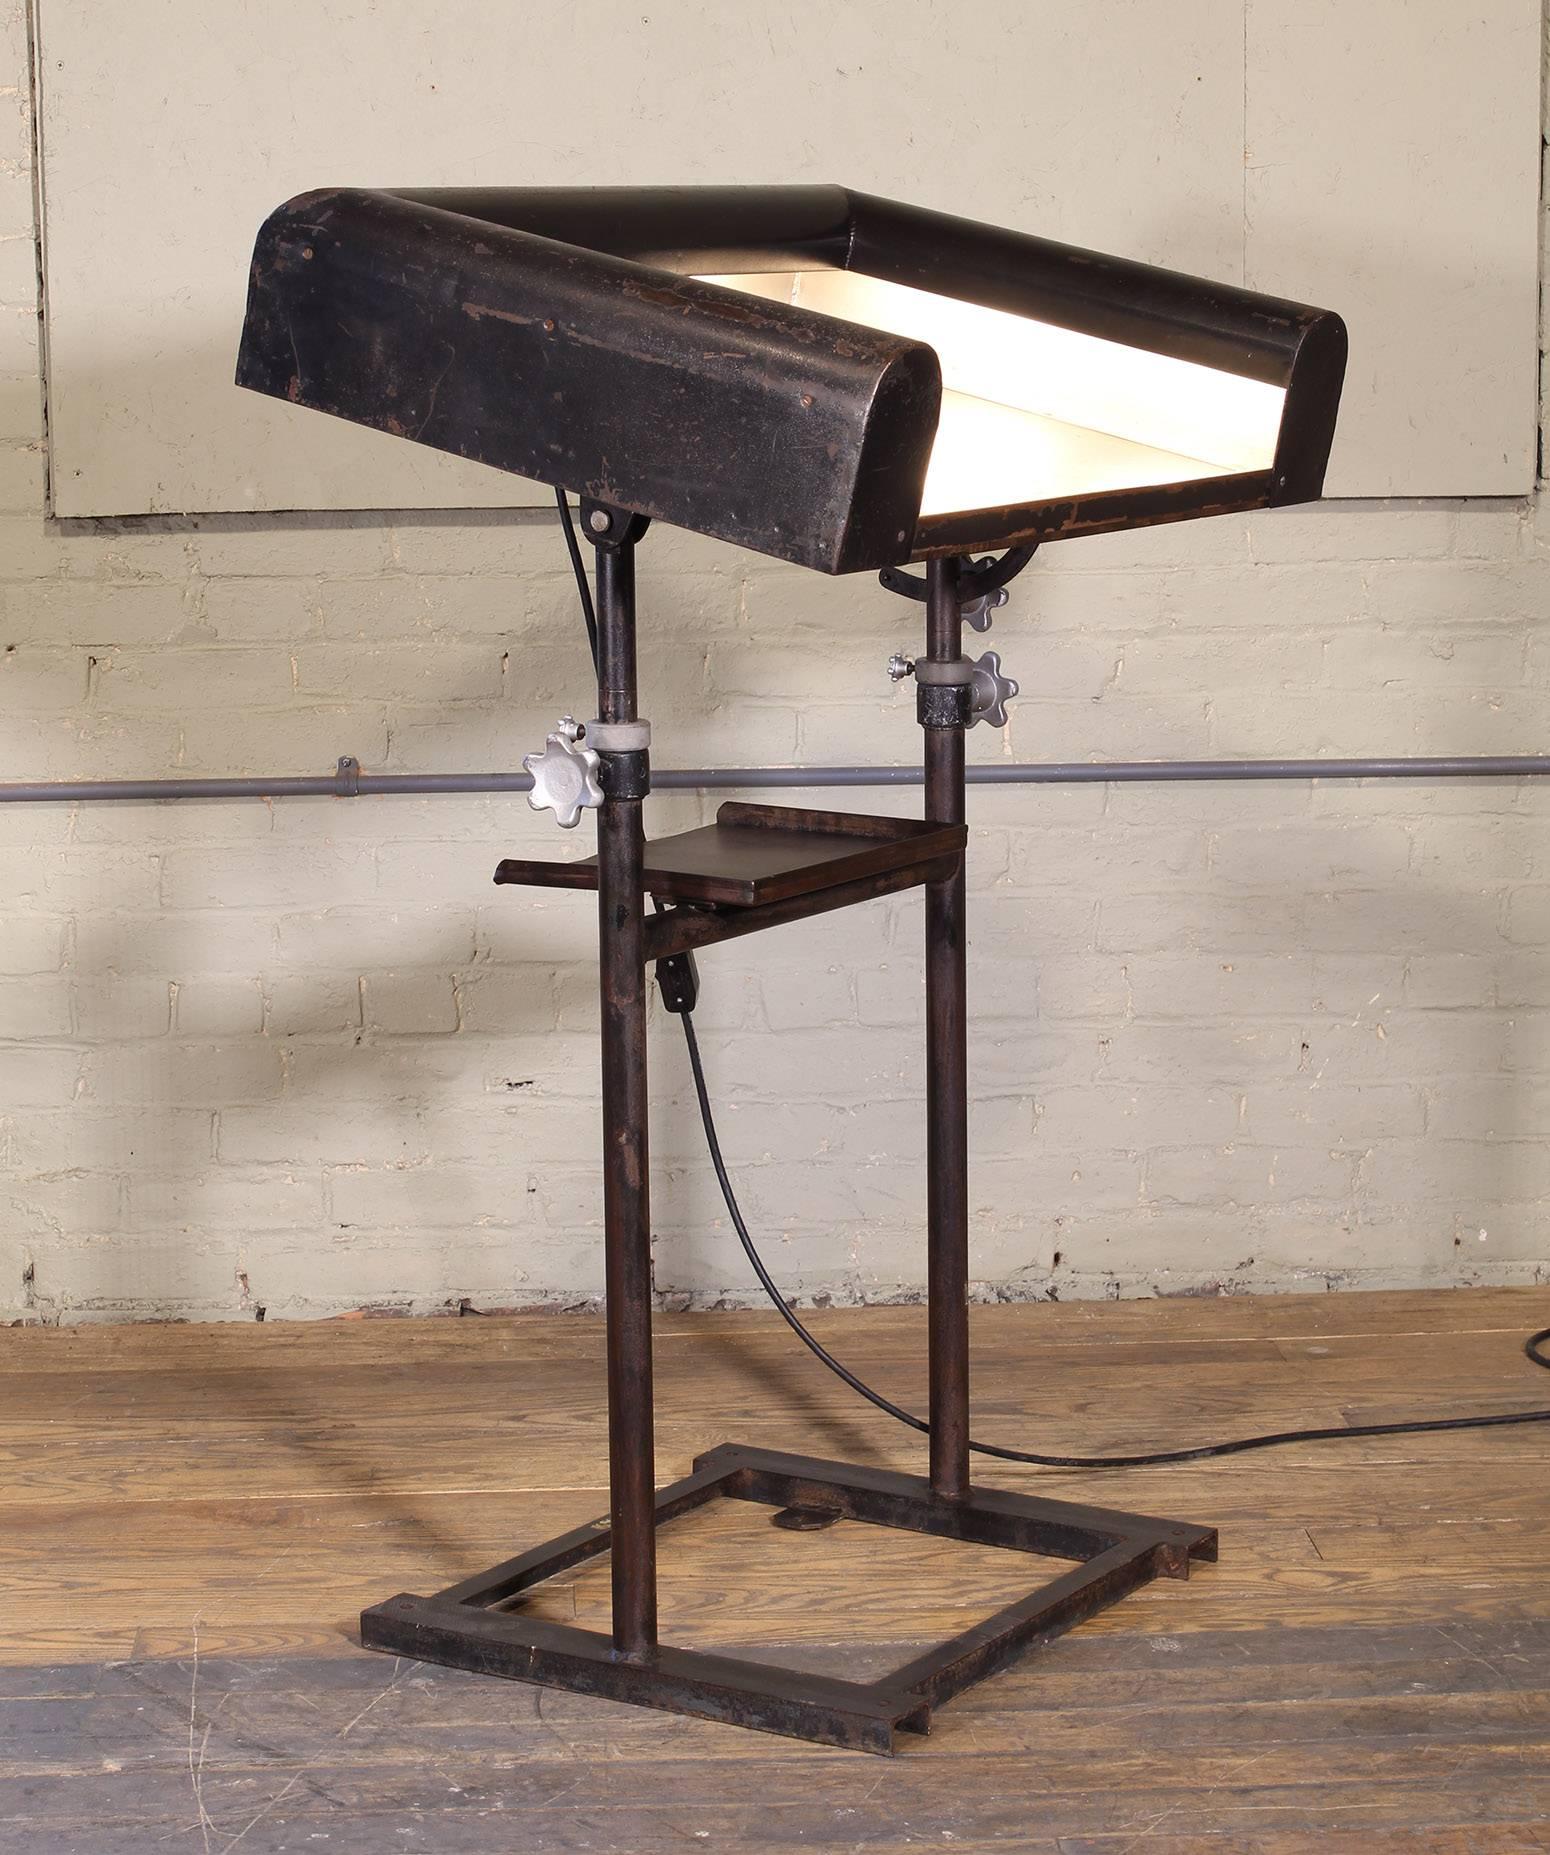 Vintage art deco modern style metal lighted lectern, podium, pedestal stand. Fixed height. Inline switch for lights. Overall dimensions measure 31 1/2